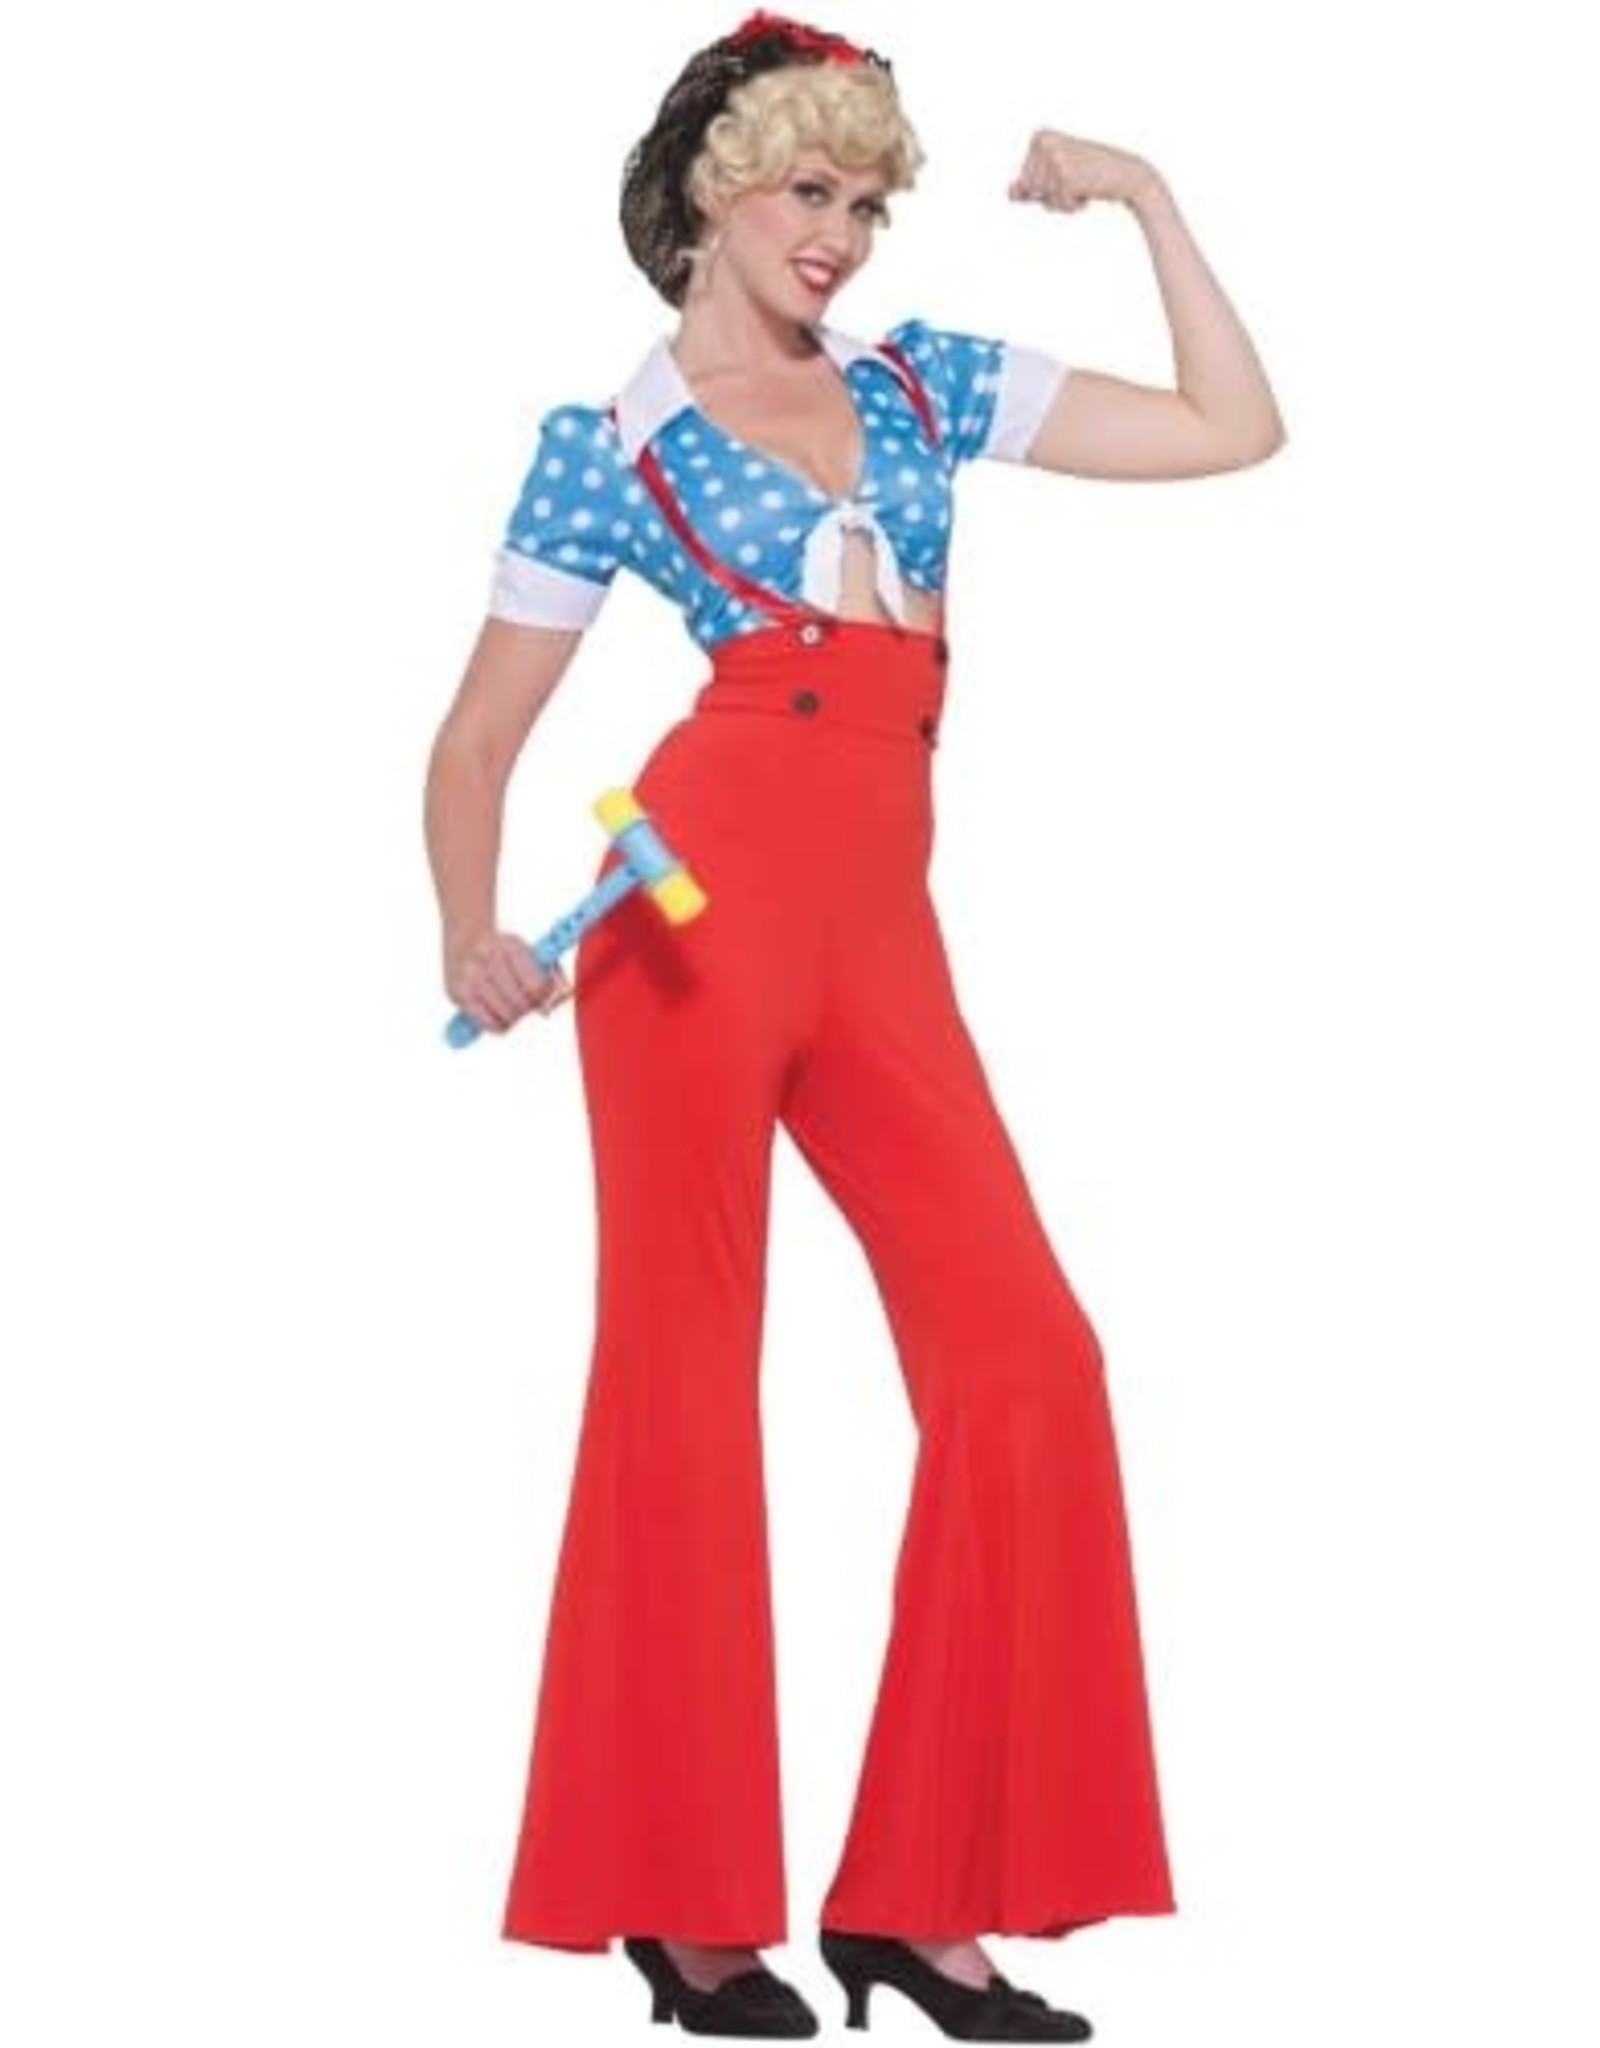 Forum Novelties Inc Rosie The Riveter, Red/Blue, Osfm - One Size Fits Most